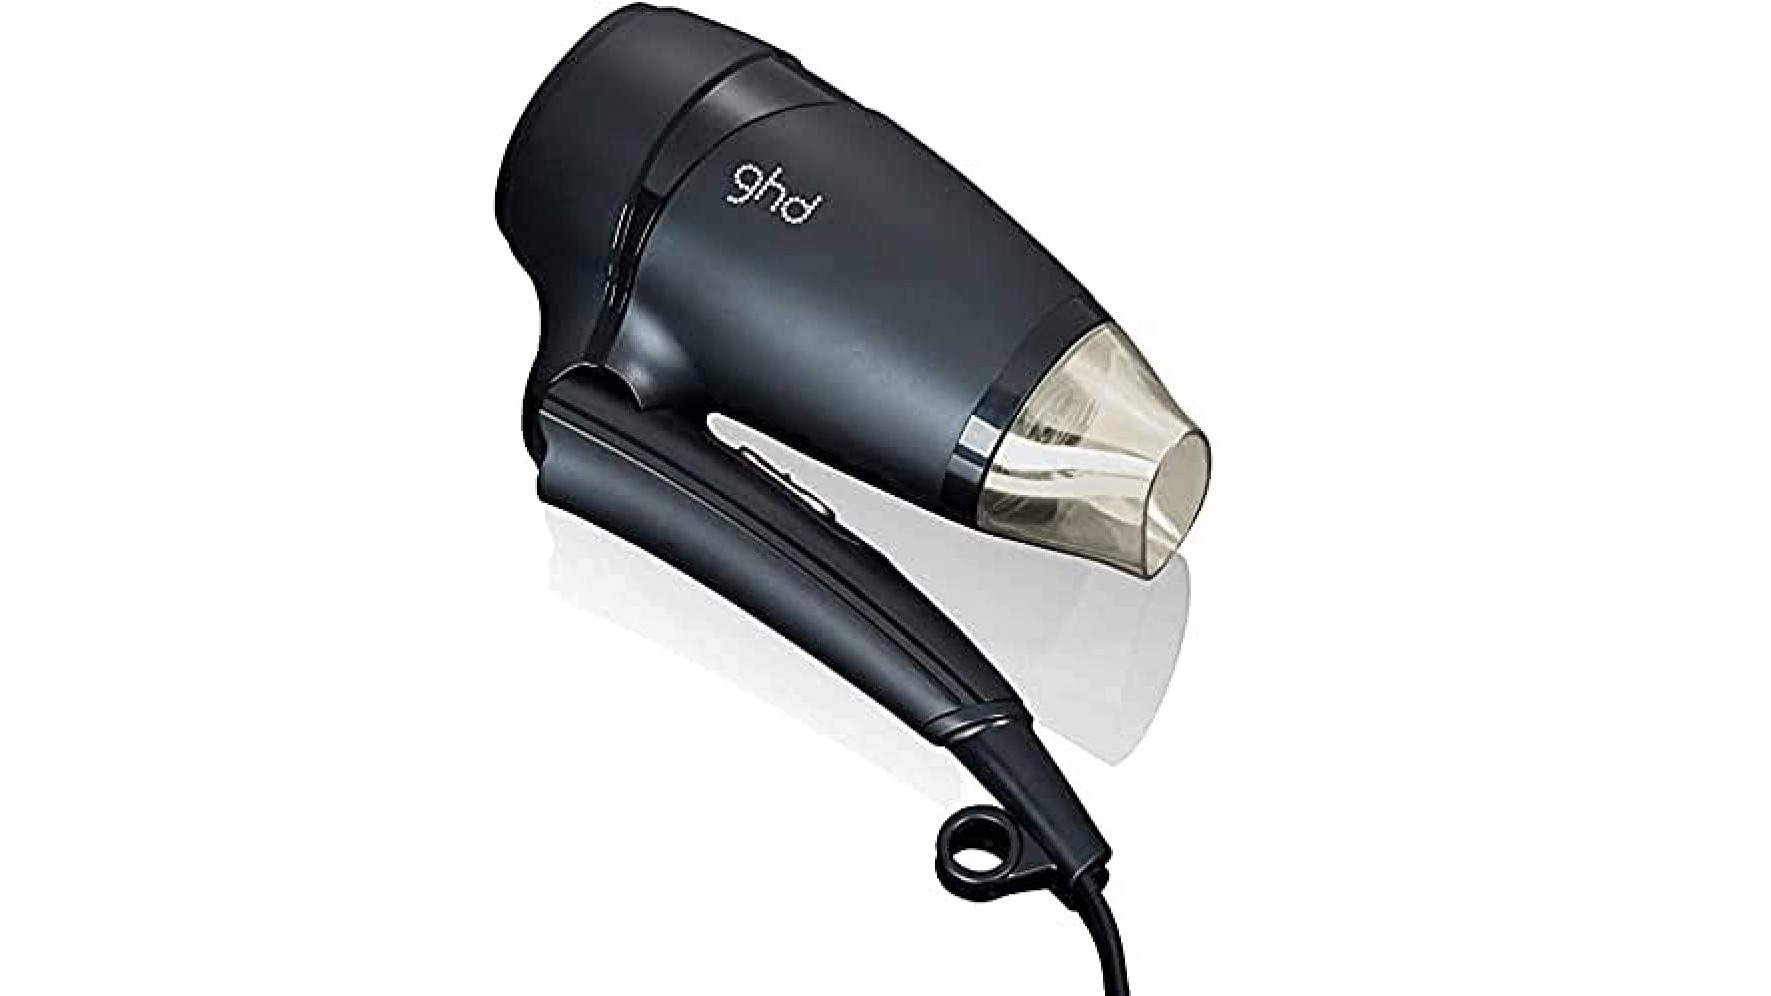 The GHD Flight treavel hair dryer folded ready to be packed in a bag